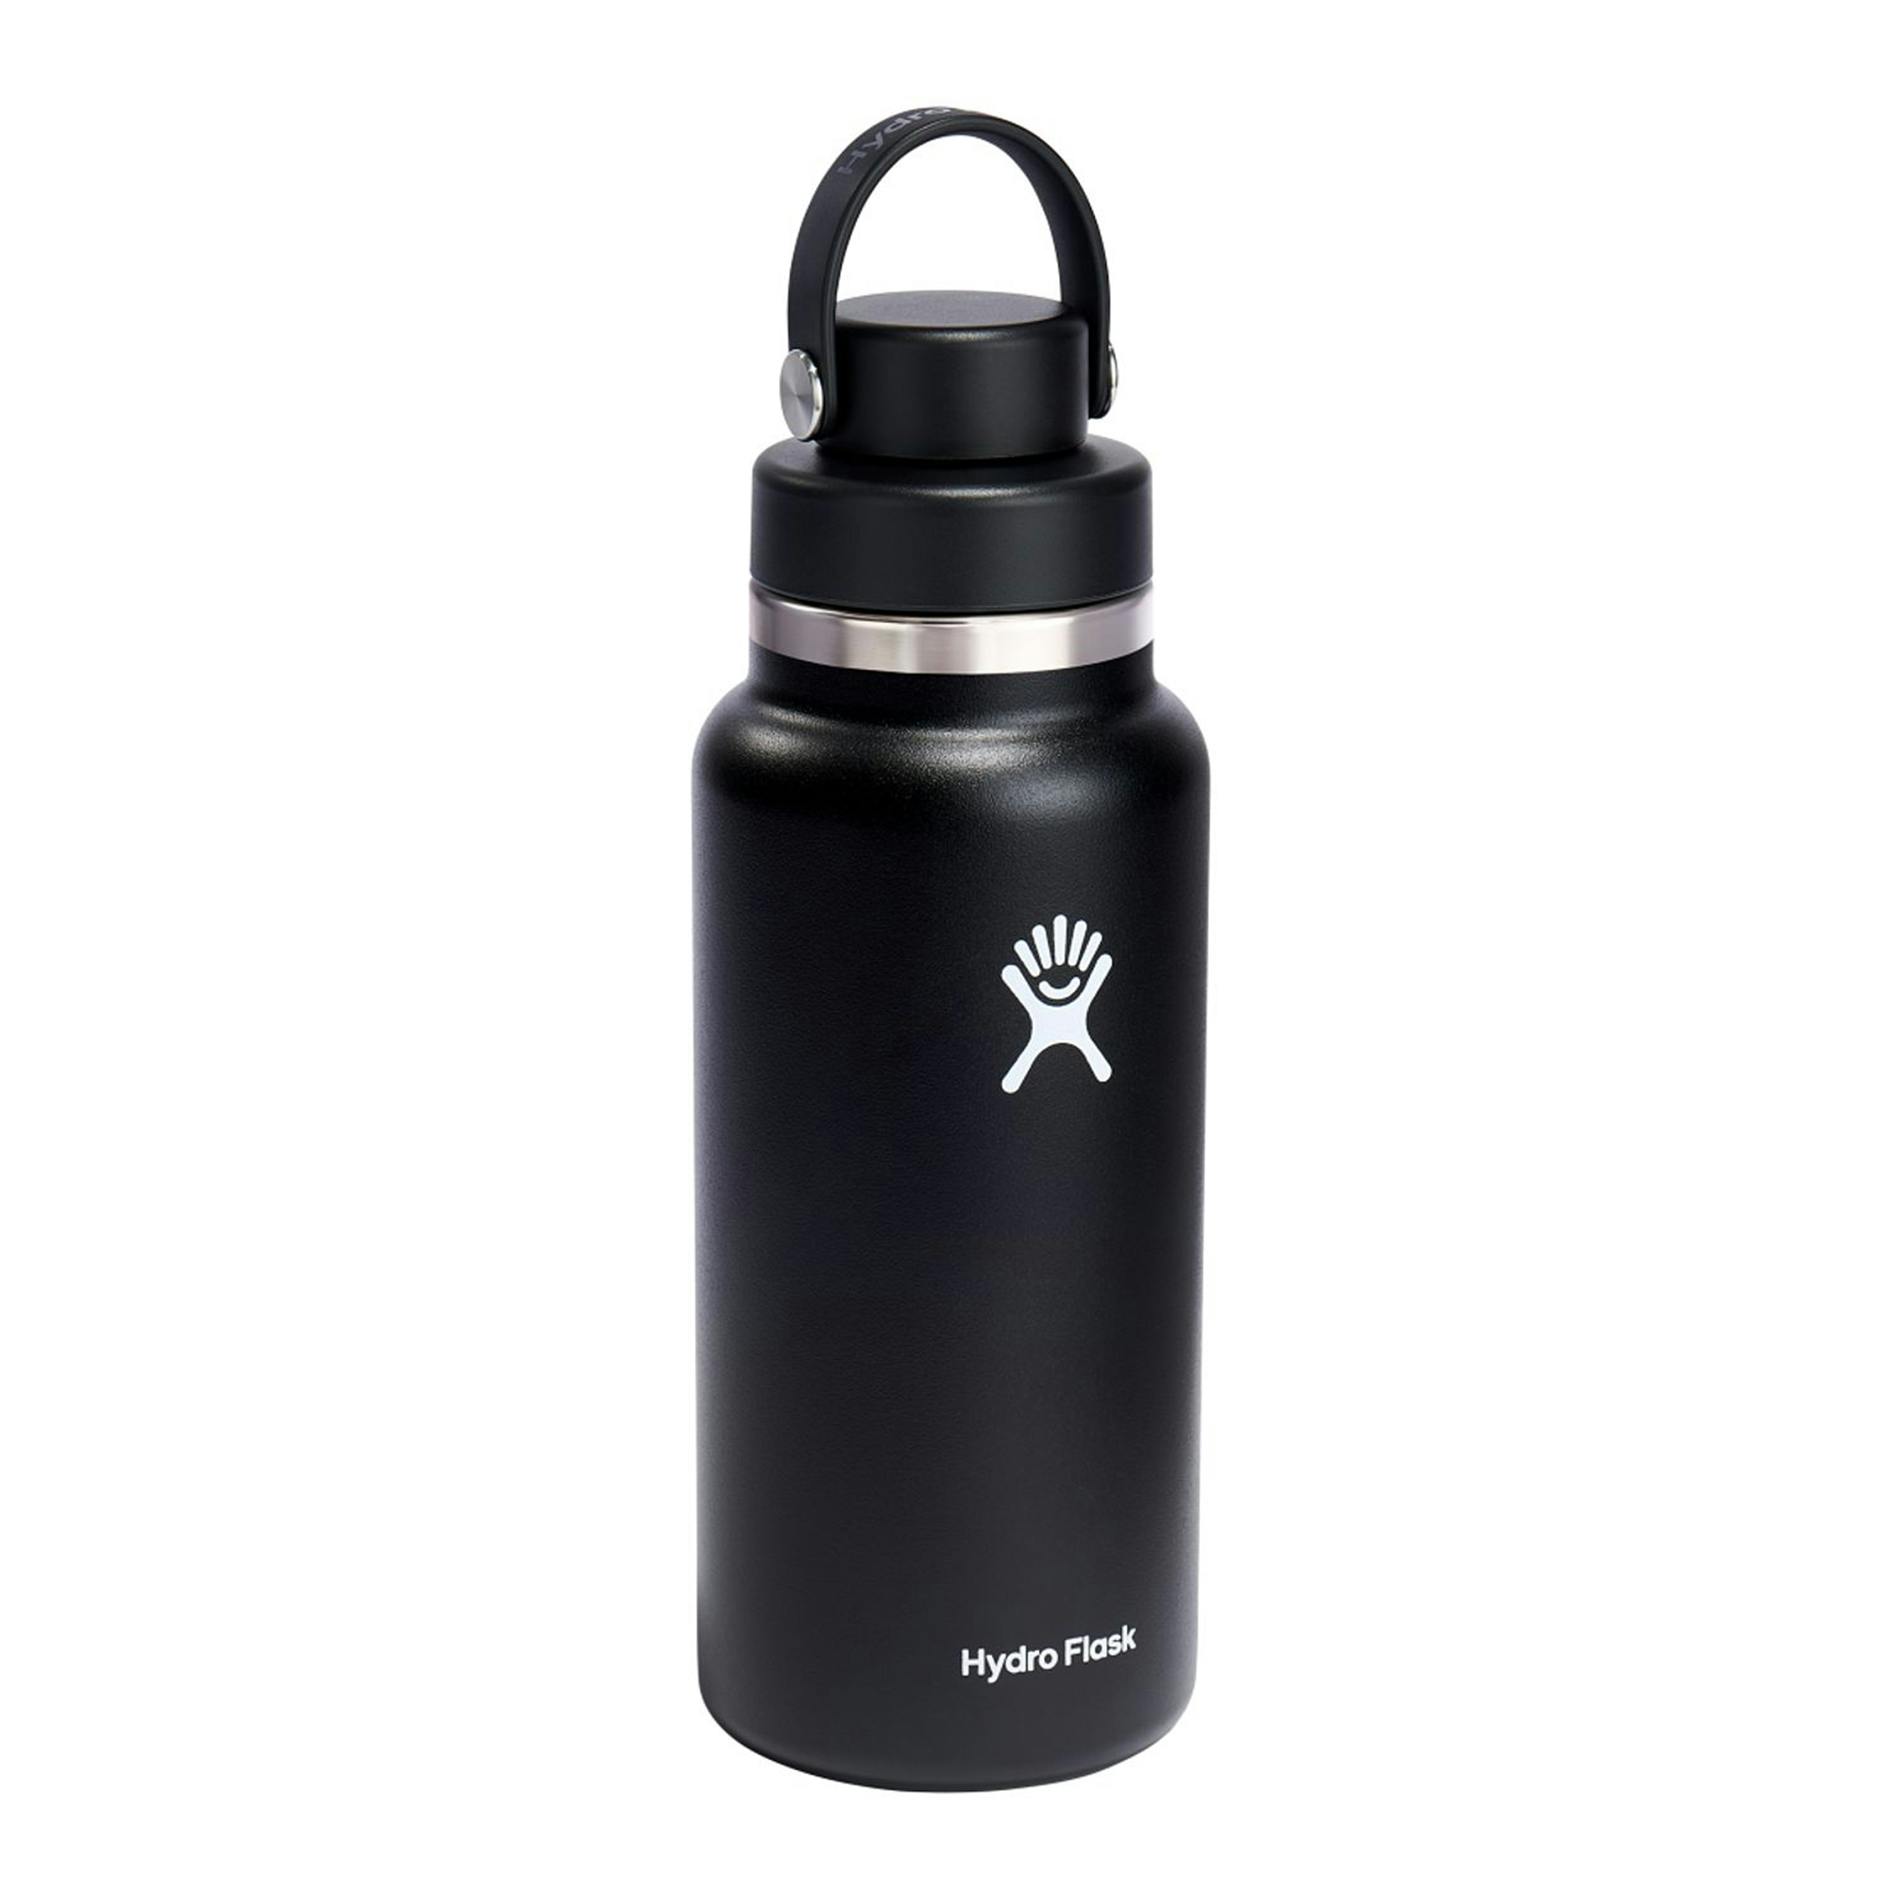 Hydro Flask Wide Mouth 32oz Bottle with Flex Chug Cap - additional Image 2